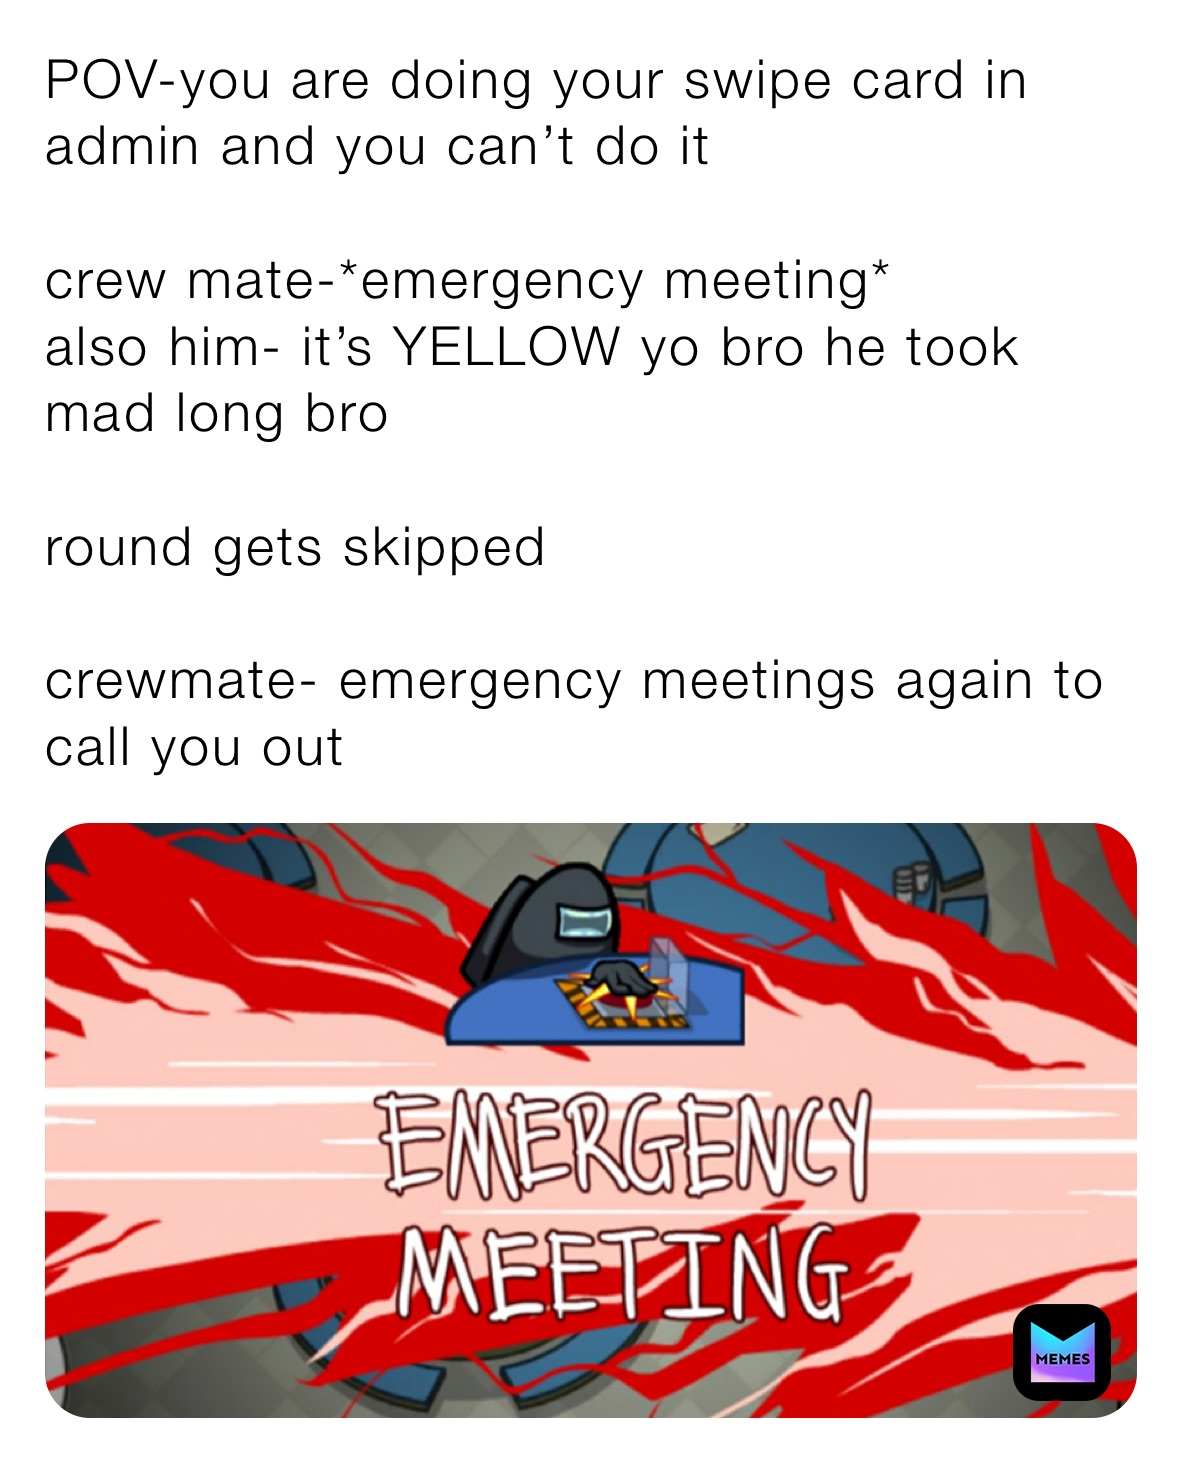 POV-you are doing your swipe card in admin and you can’t do it

crew mate-*emergency meeting*
also him- it’s YELLOW yo bro he took mad long bro 

round gets skipped 

crewmate- emergency meetings again to call you out 